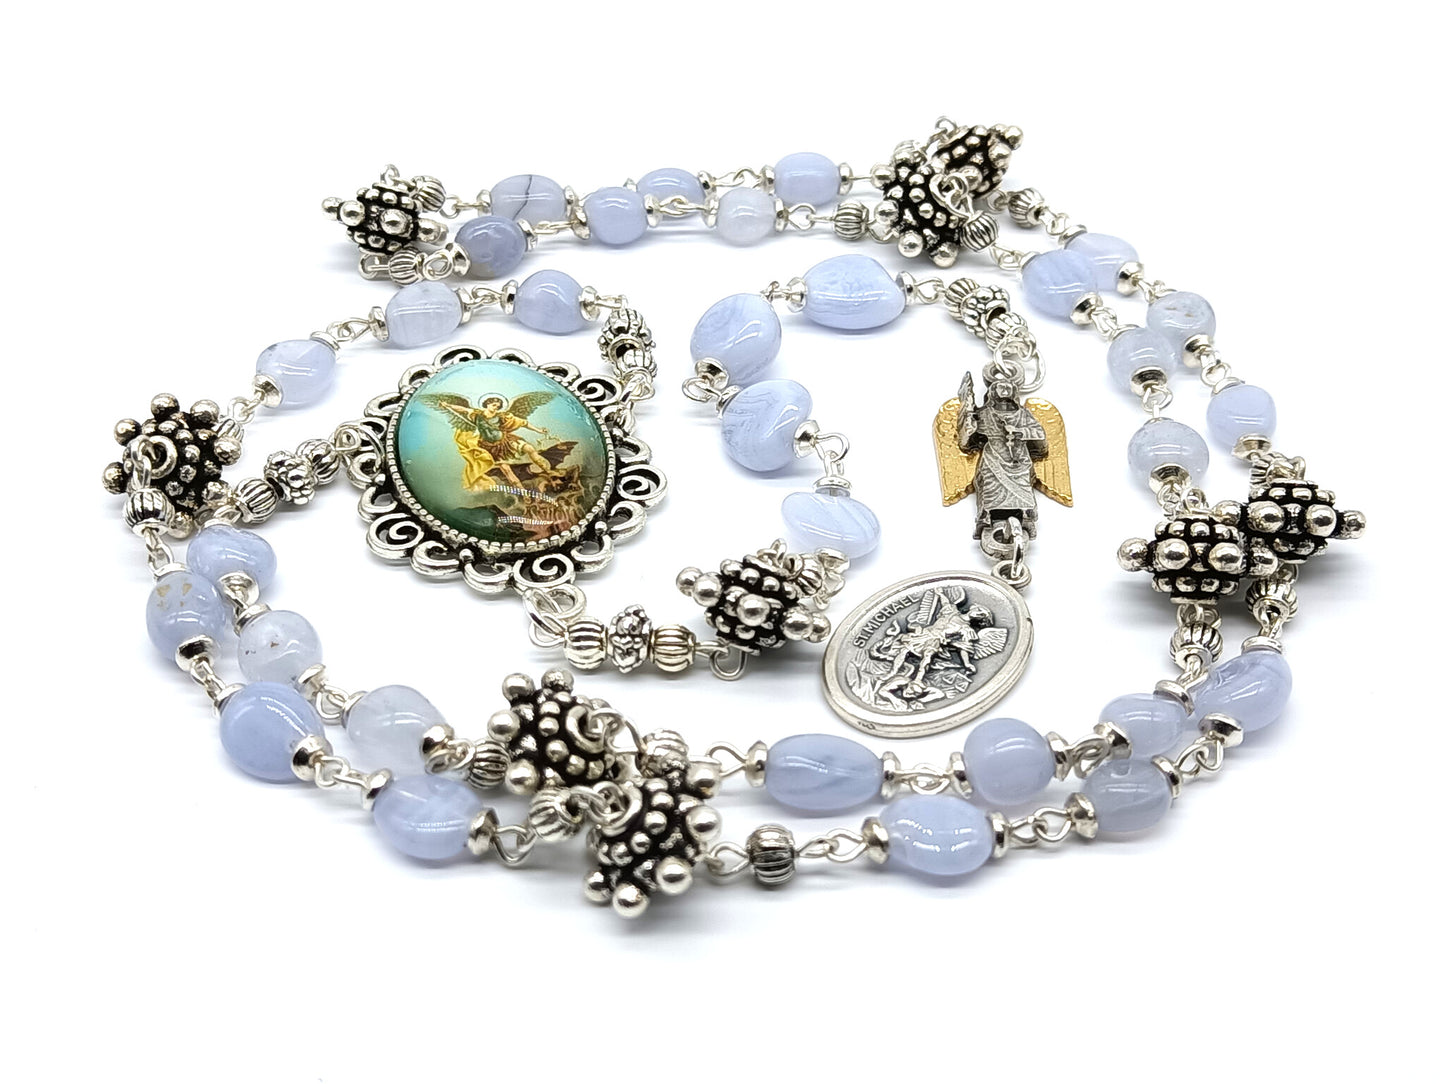 Saint Michael unique rosary beads prayer chaplet with blue agate gemstone beads, Saint Michael picture medal, angel linking medal and silver bead caps.